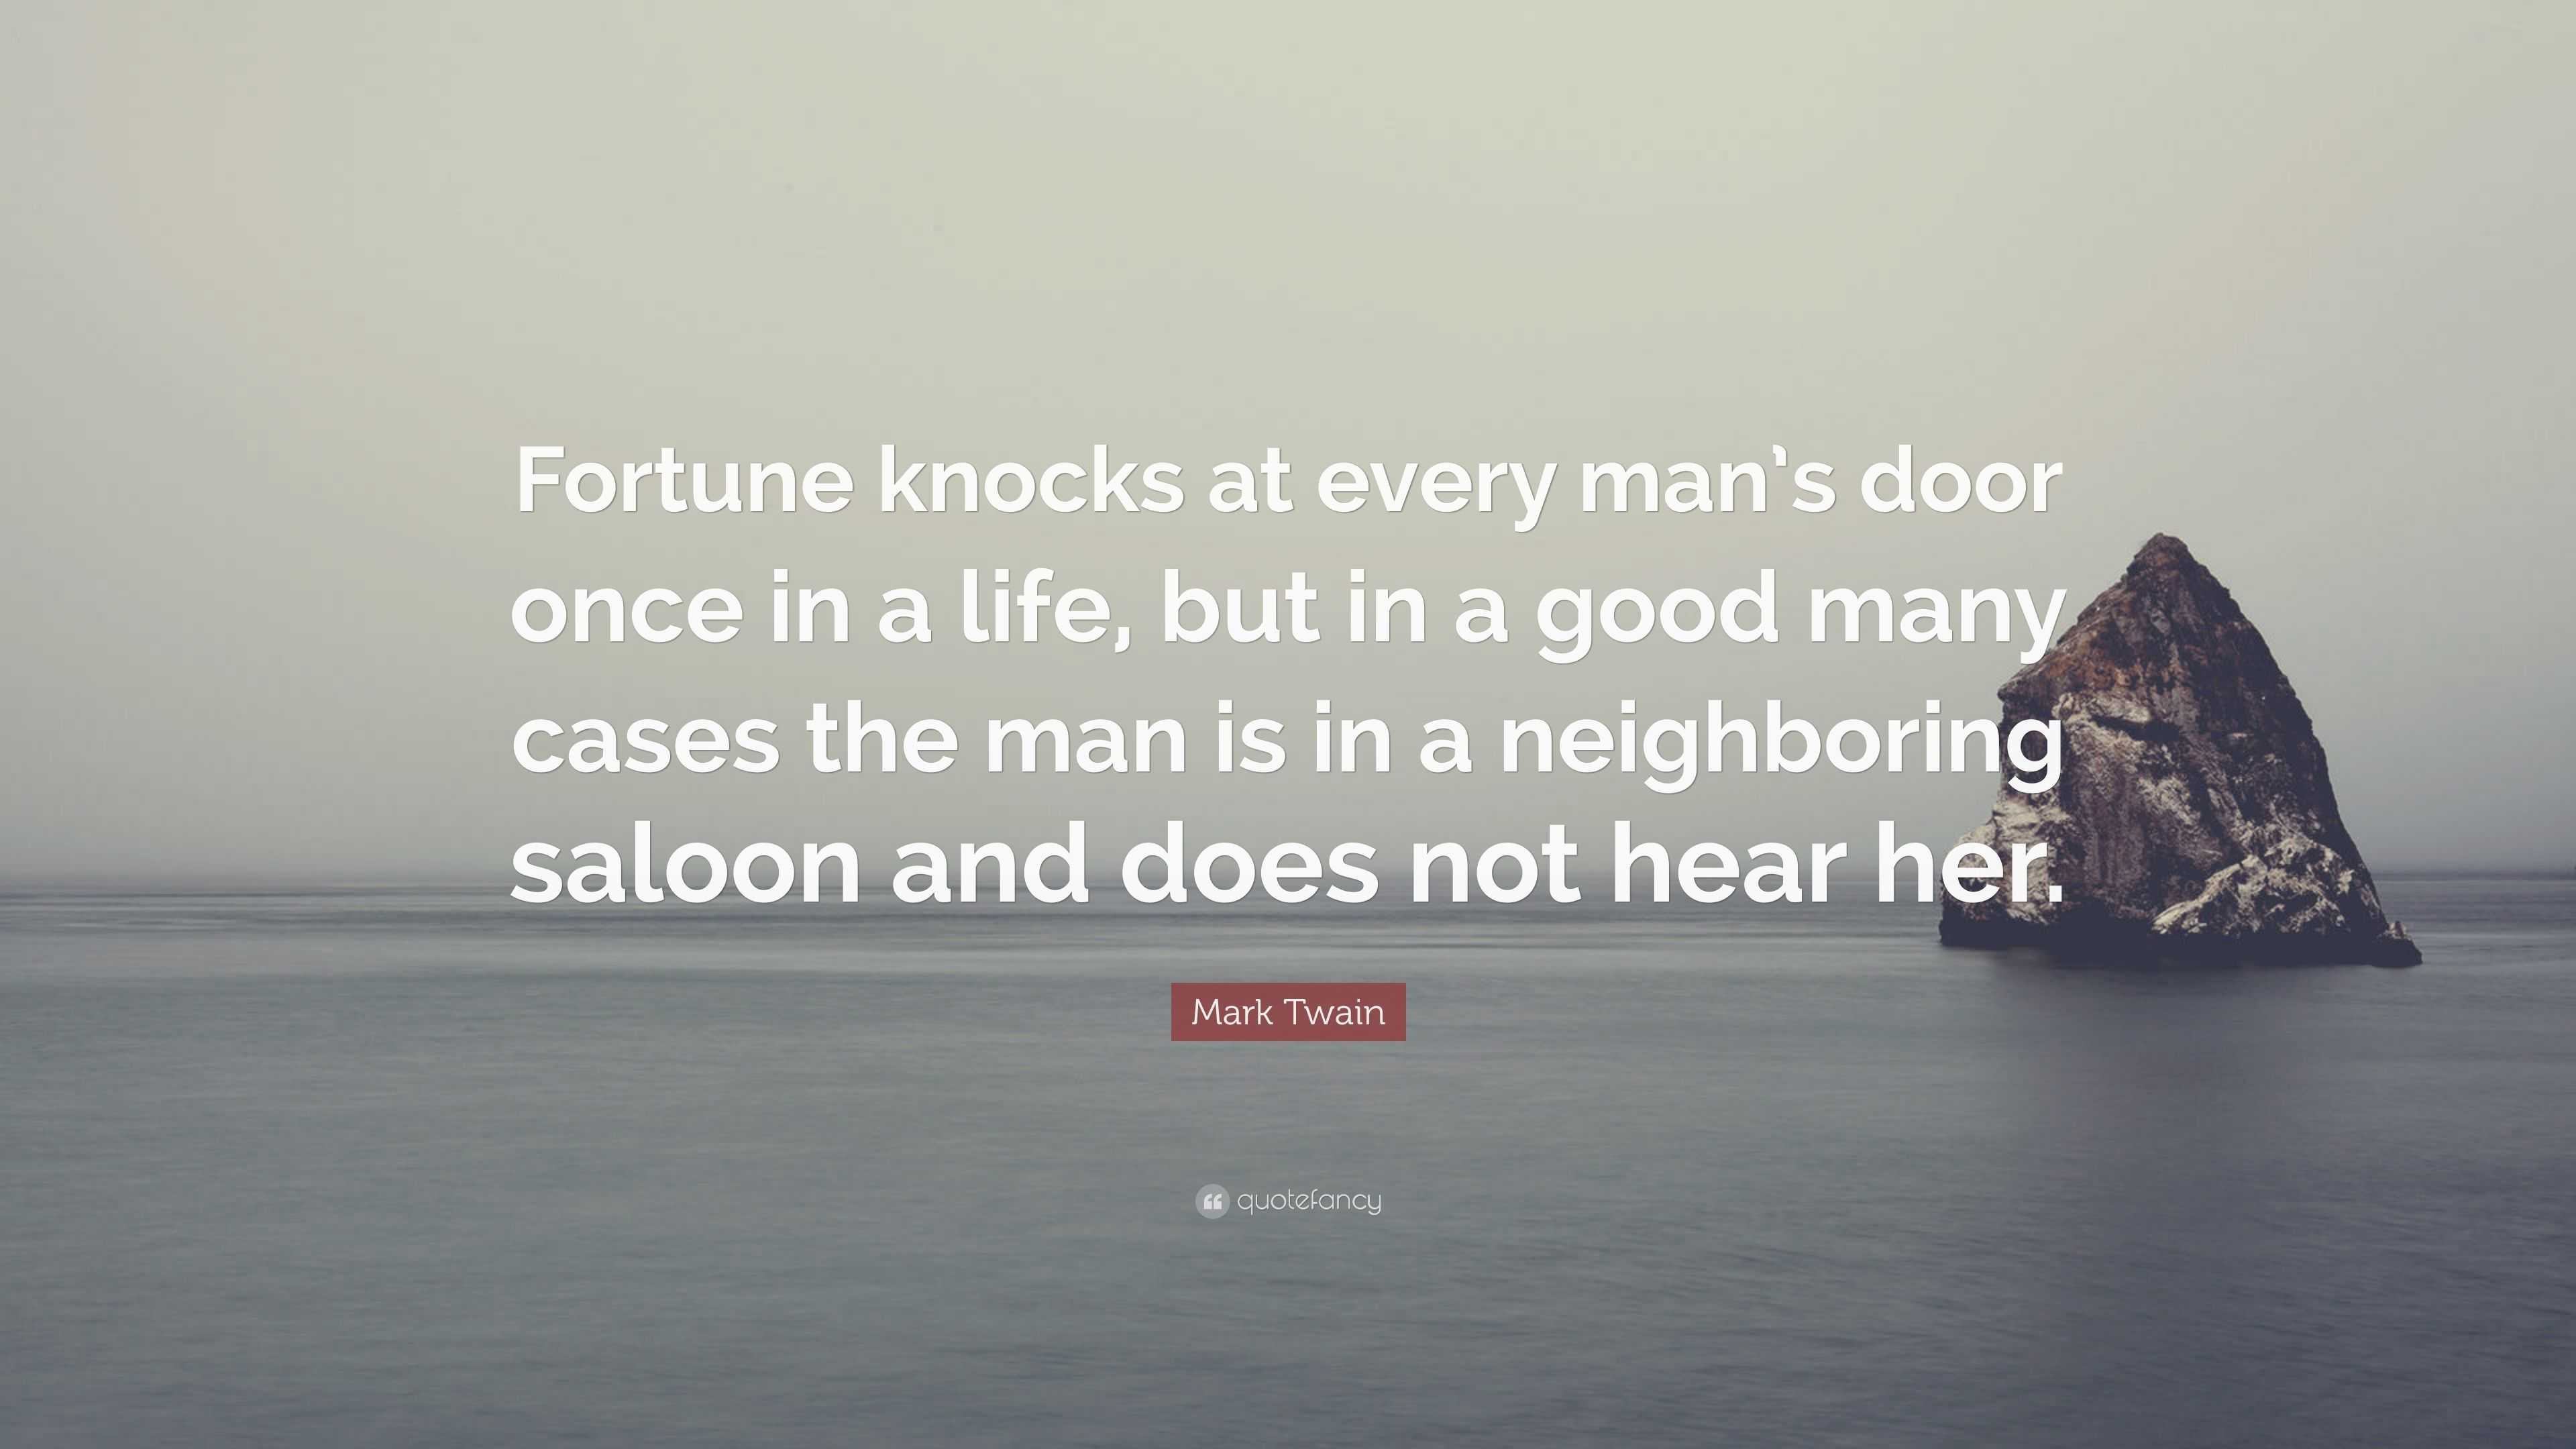 mark twain life quotes mark twain quote u201cfortune knocks at every man u0027s door once in a